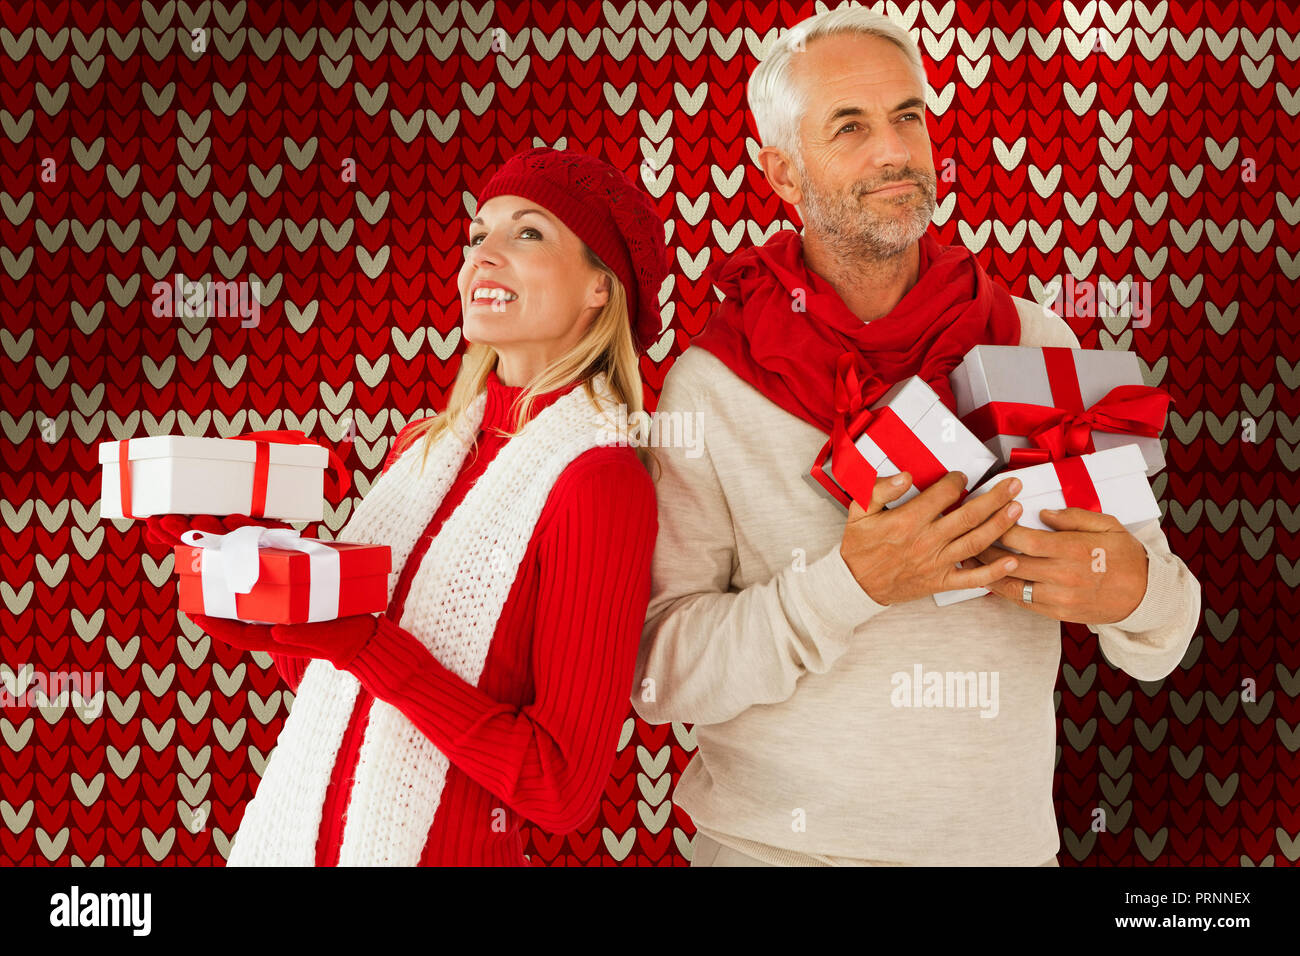 Composite image of happy festive couple with gifts Stock Photo